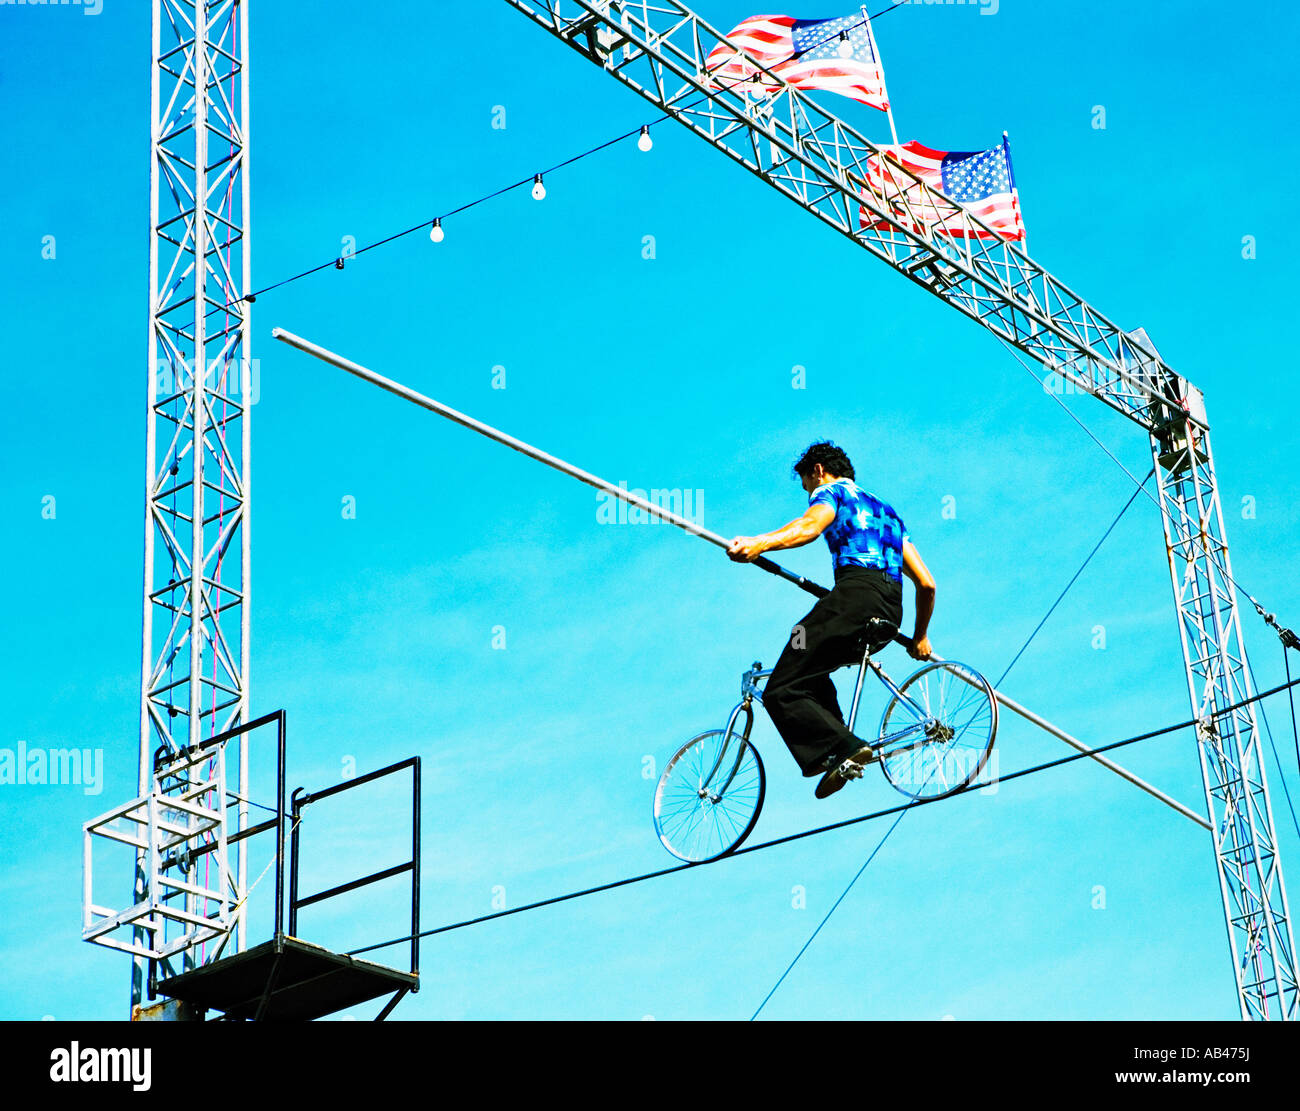 high wire walker riding bicycle set against blue sky with American flags flying overhead Stock Photo